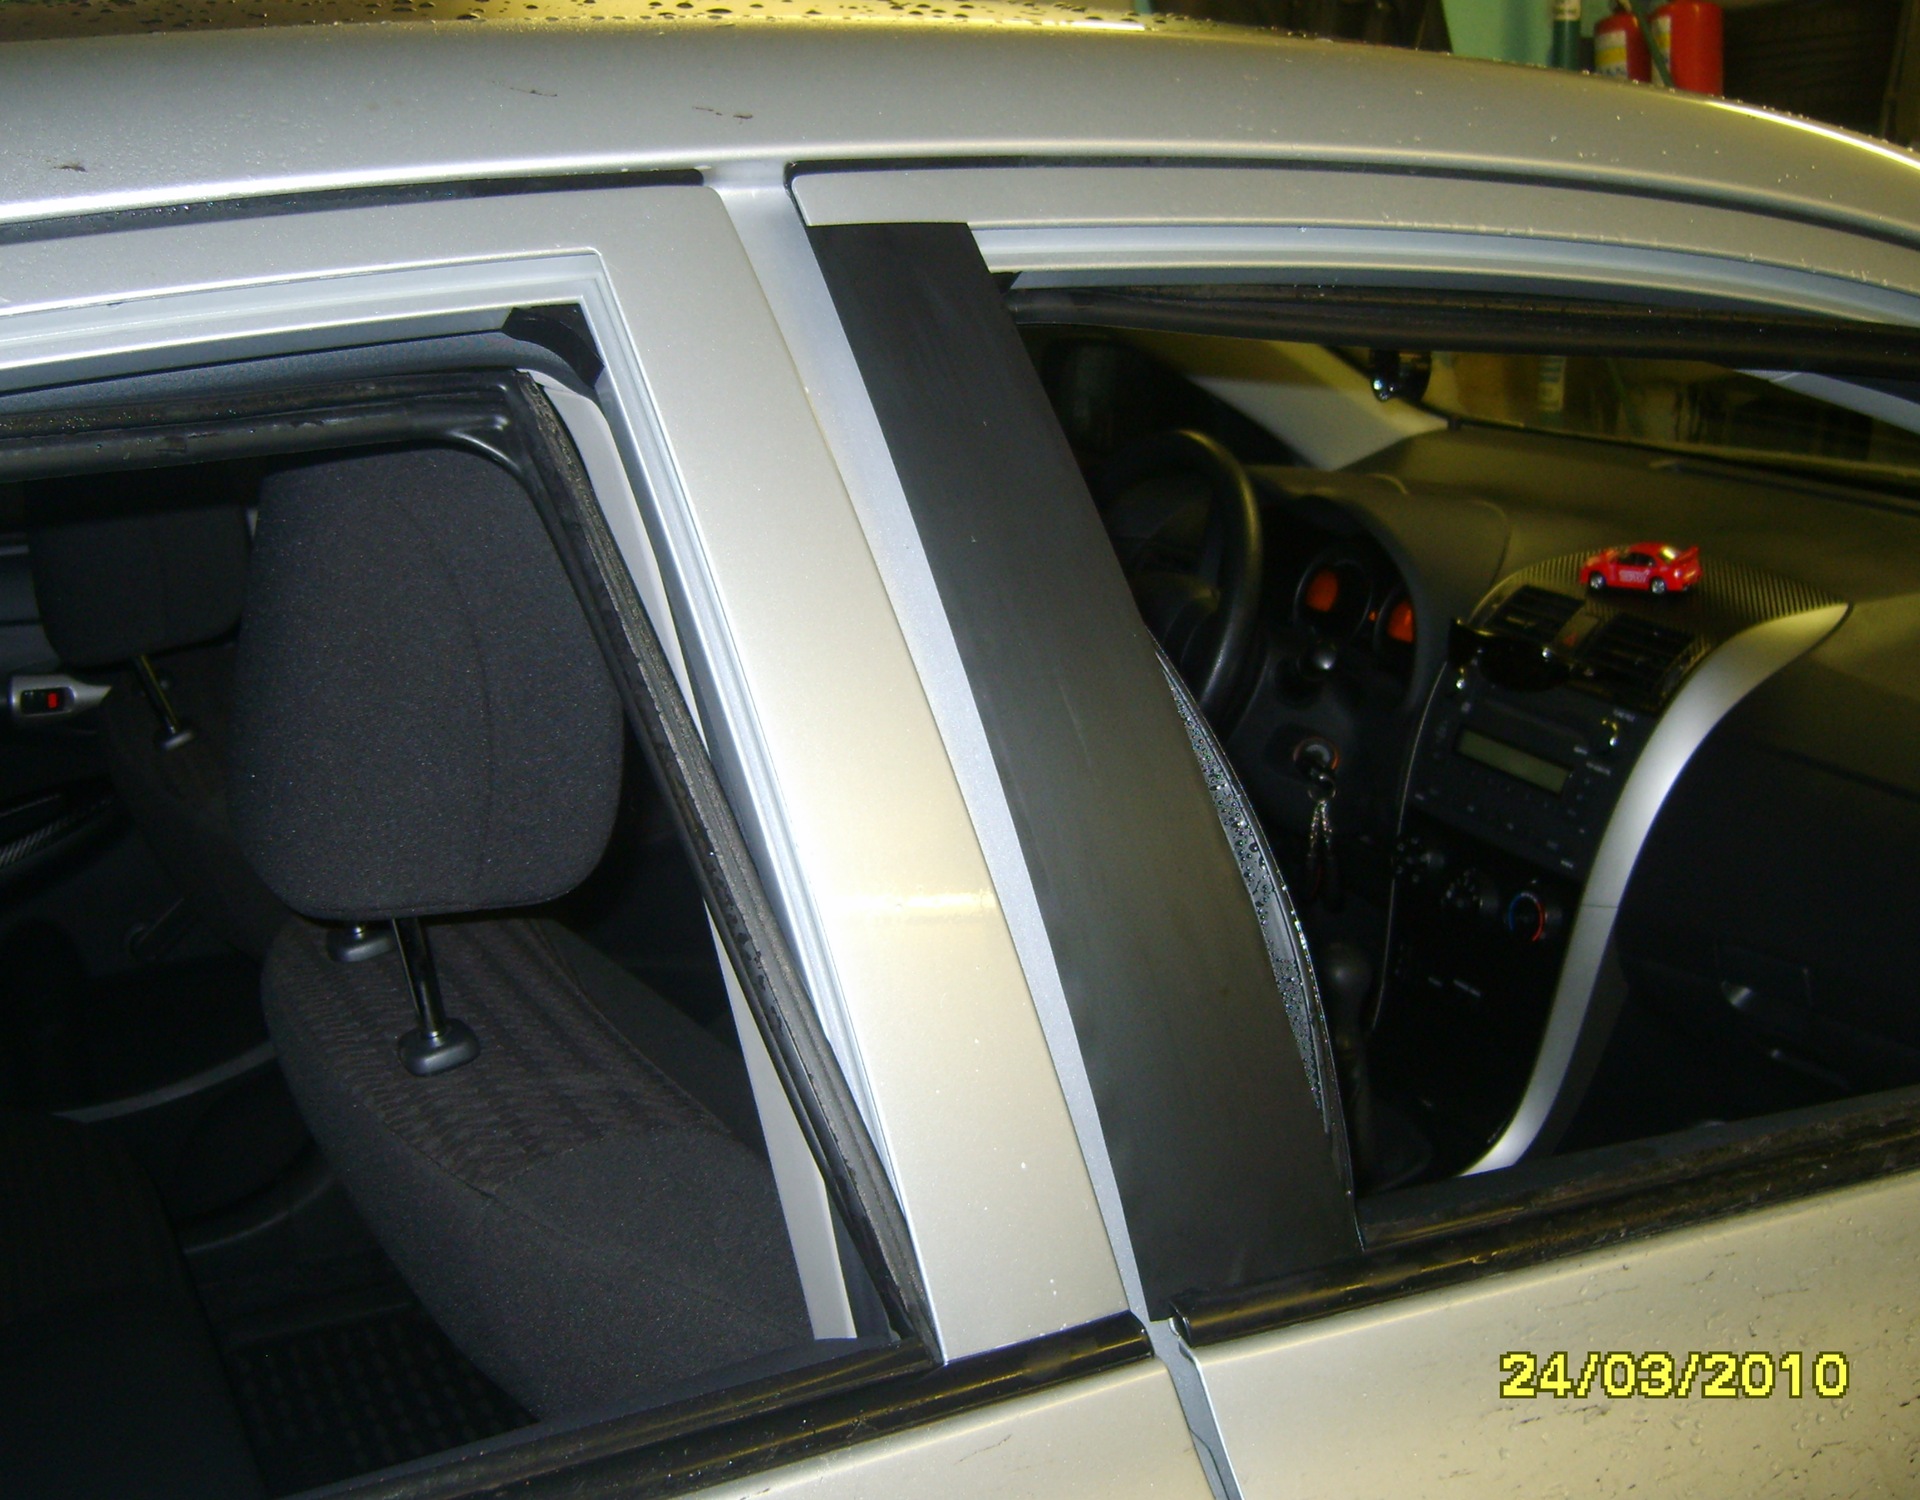 The racks were added to the black roof - Toyota Corolla 14 liter 2008